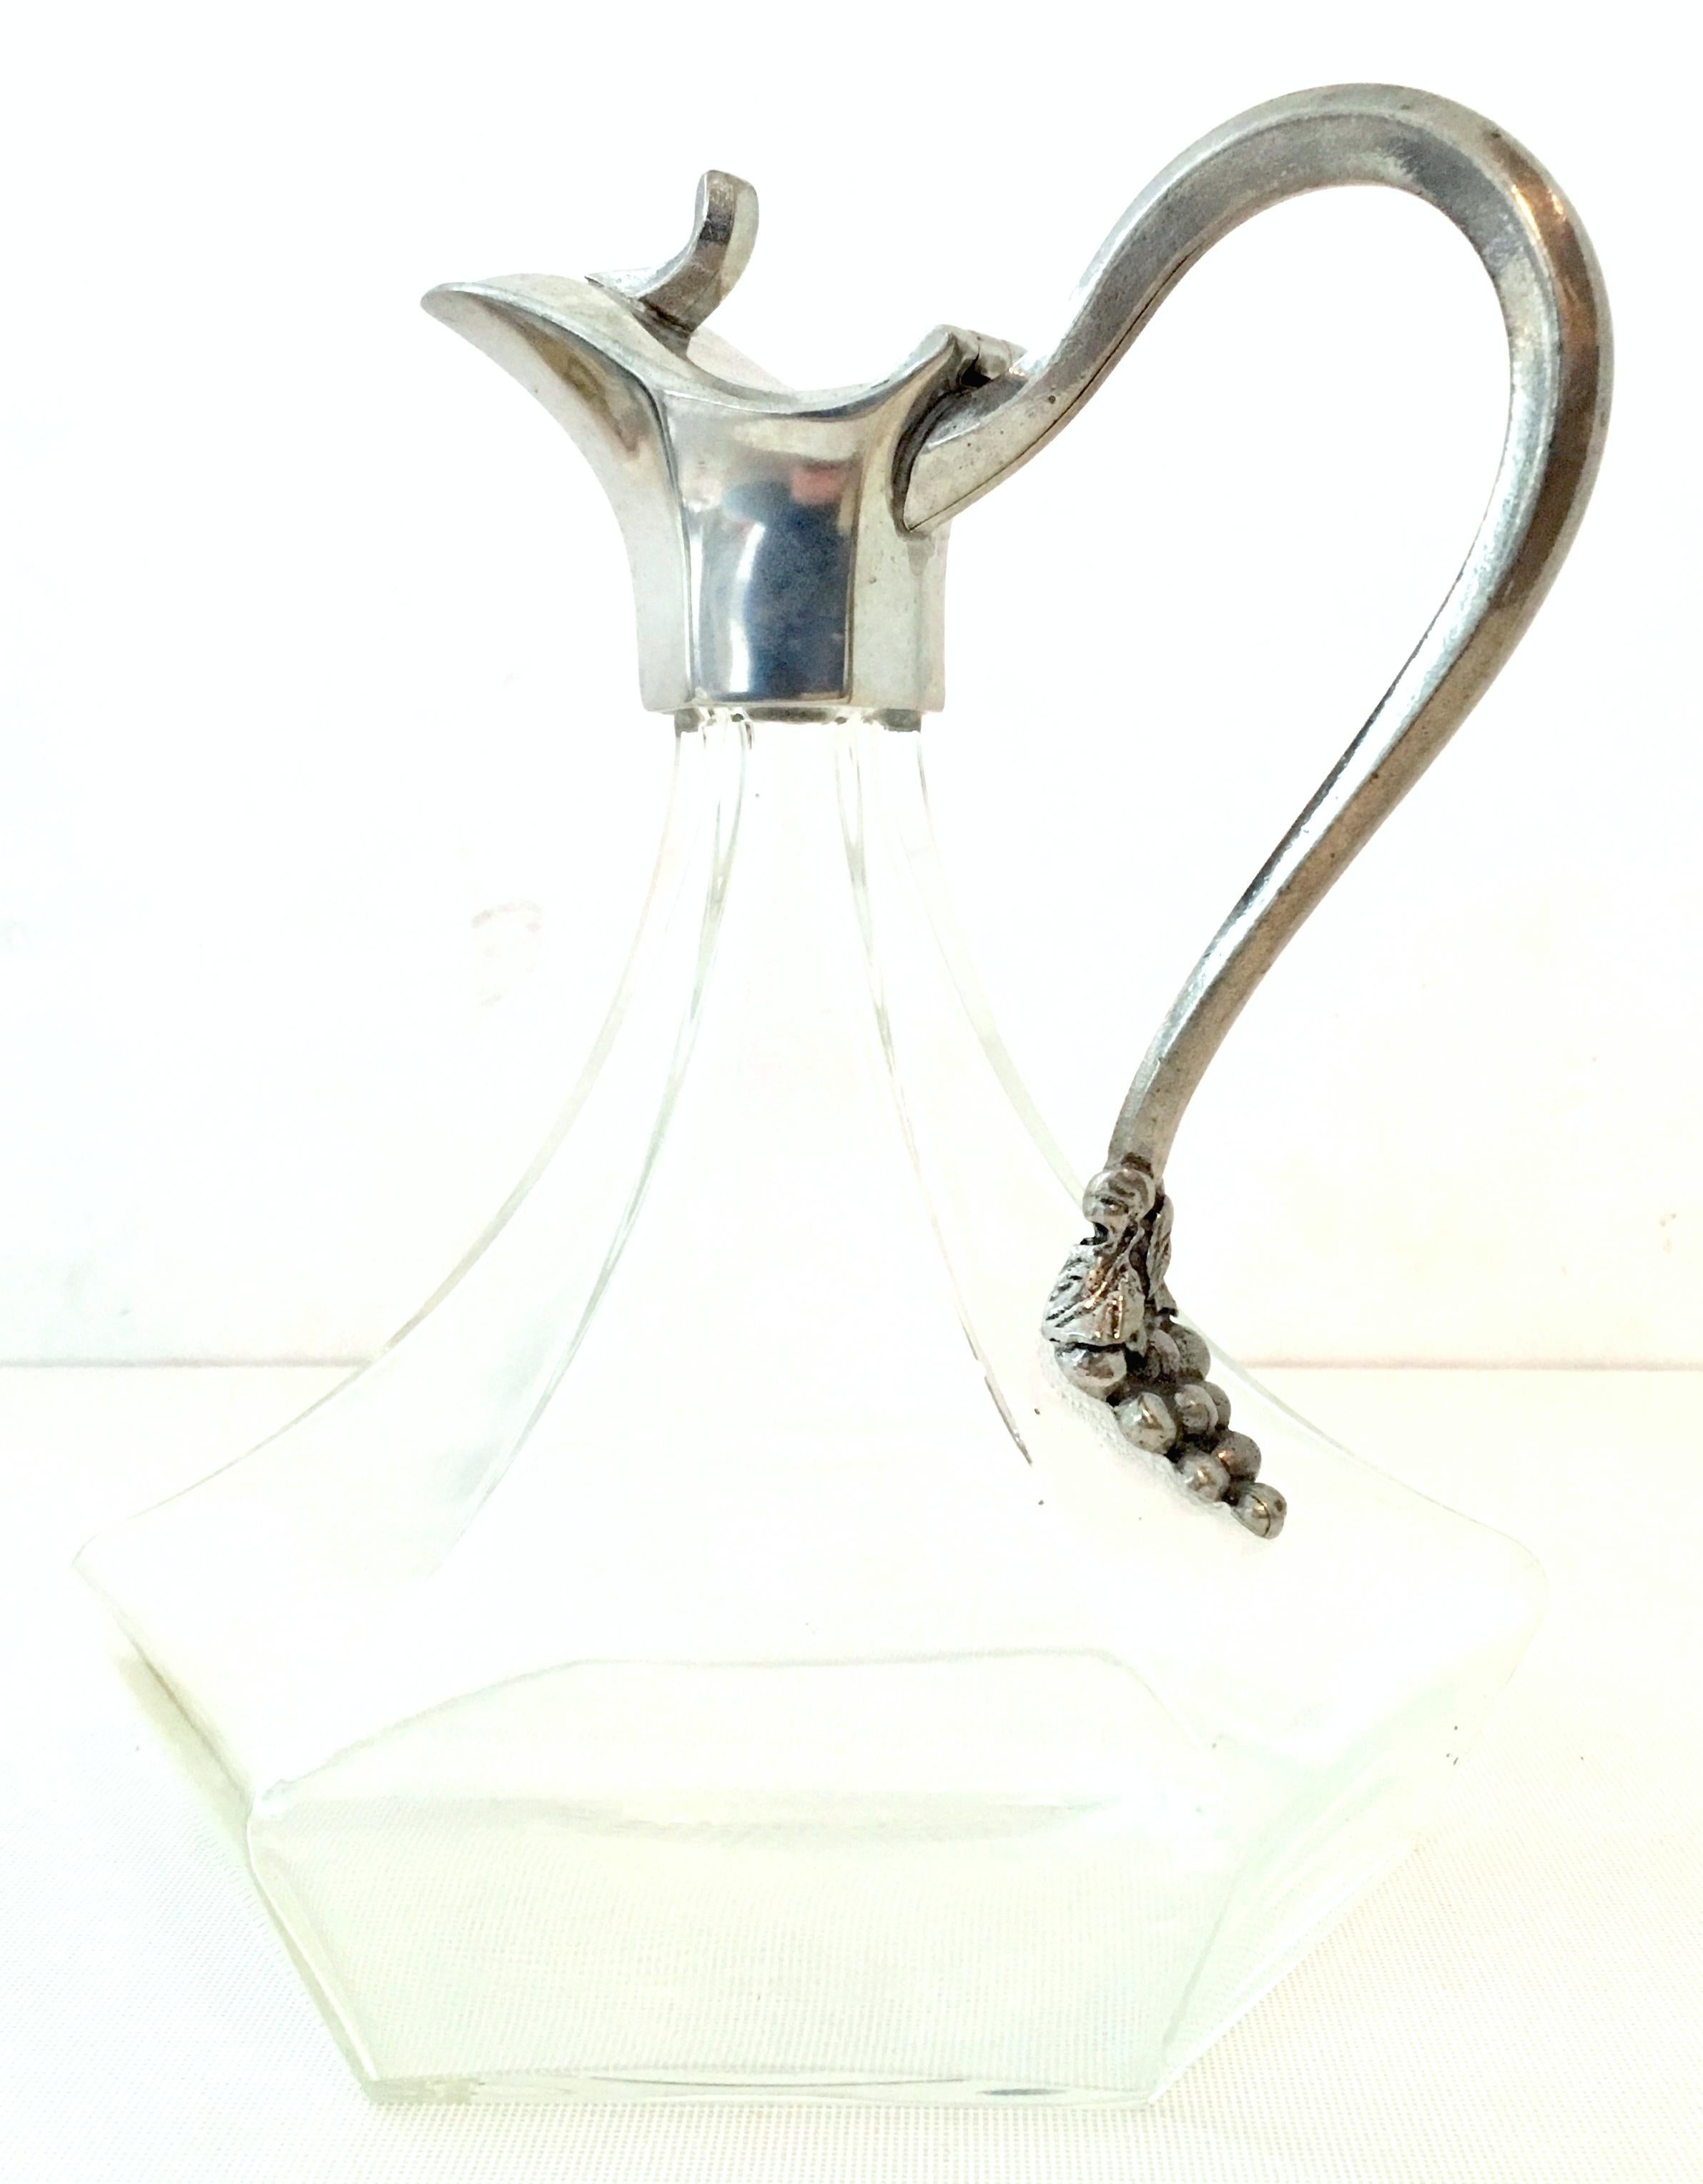 20th century French handmade blown glass and pewter grape motif hinged carafe pitcher. This lovely handcrafted piece is signed on the underside of the hinged top,
Etian Fait Main-Jean Goardere.